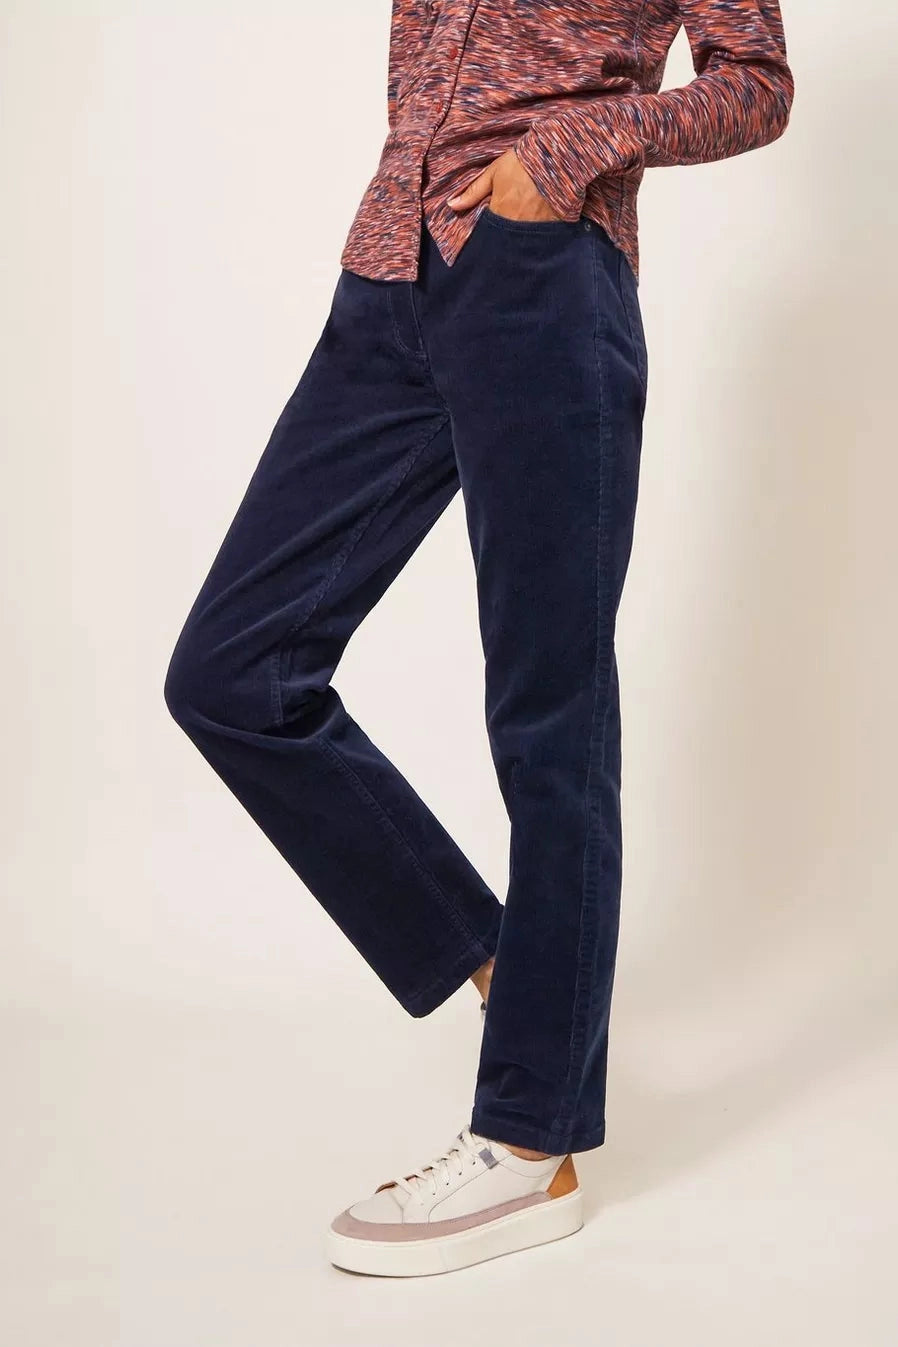 White Stuff Brooke Straight Cord Trouser in Dark Navy-Womens-Ohh! By Gum - Shop Sustainable